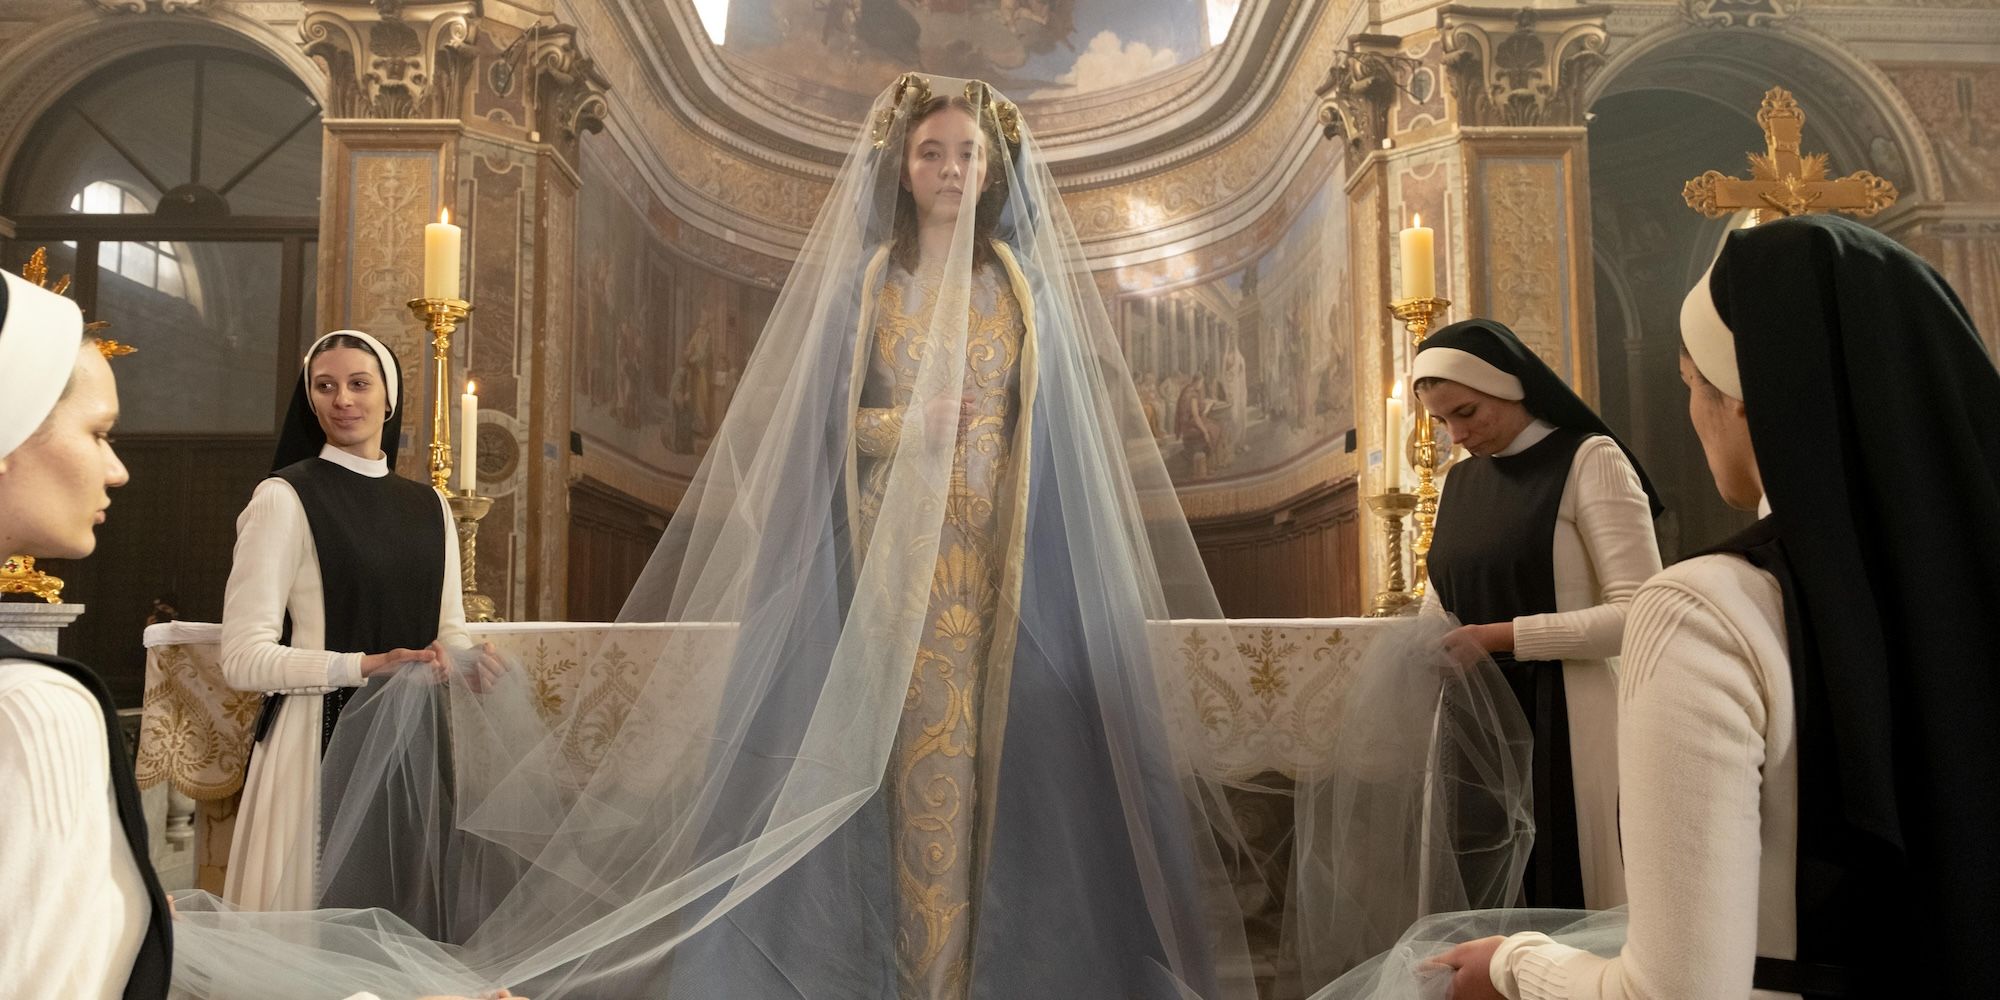 Sydney Sweeney's Sister Cecilia decked out on a dress and veil surrounded by nuns in Immaculate